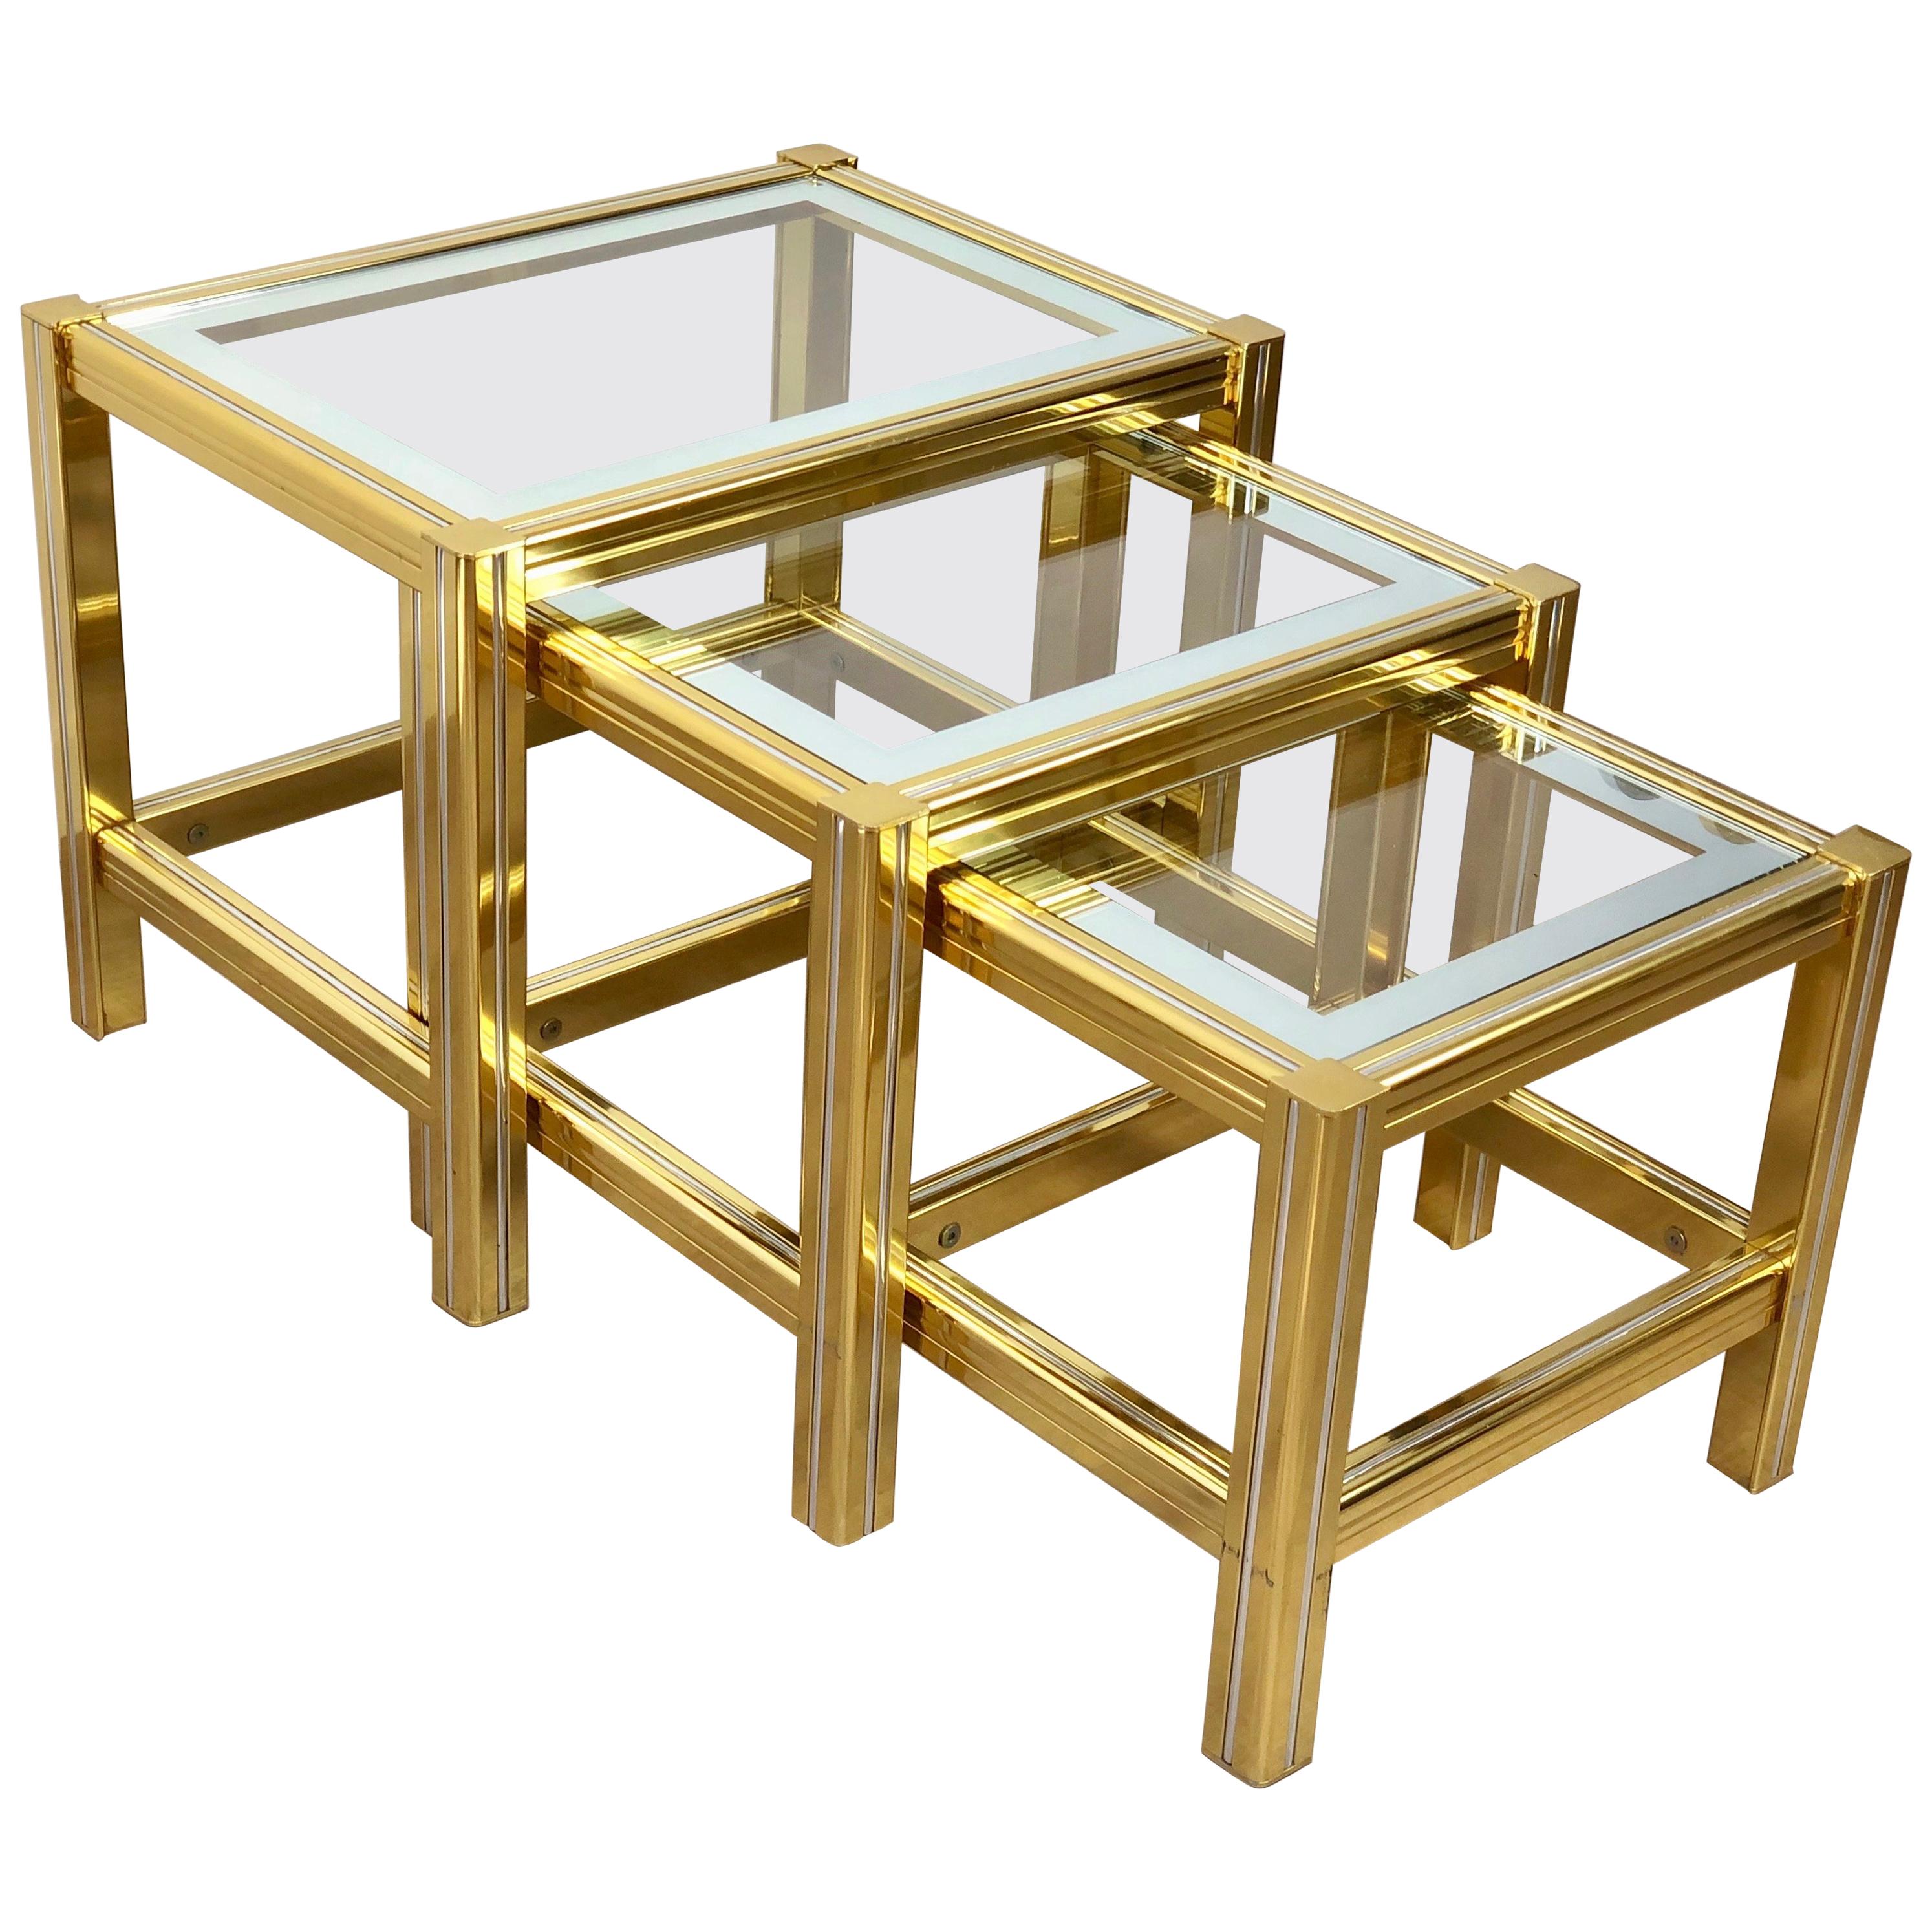 Tris of Increasing Dimensions Side Coffe Table in Brass, Glass and Chrome, 1970s